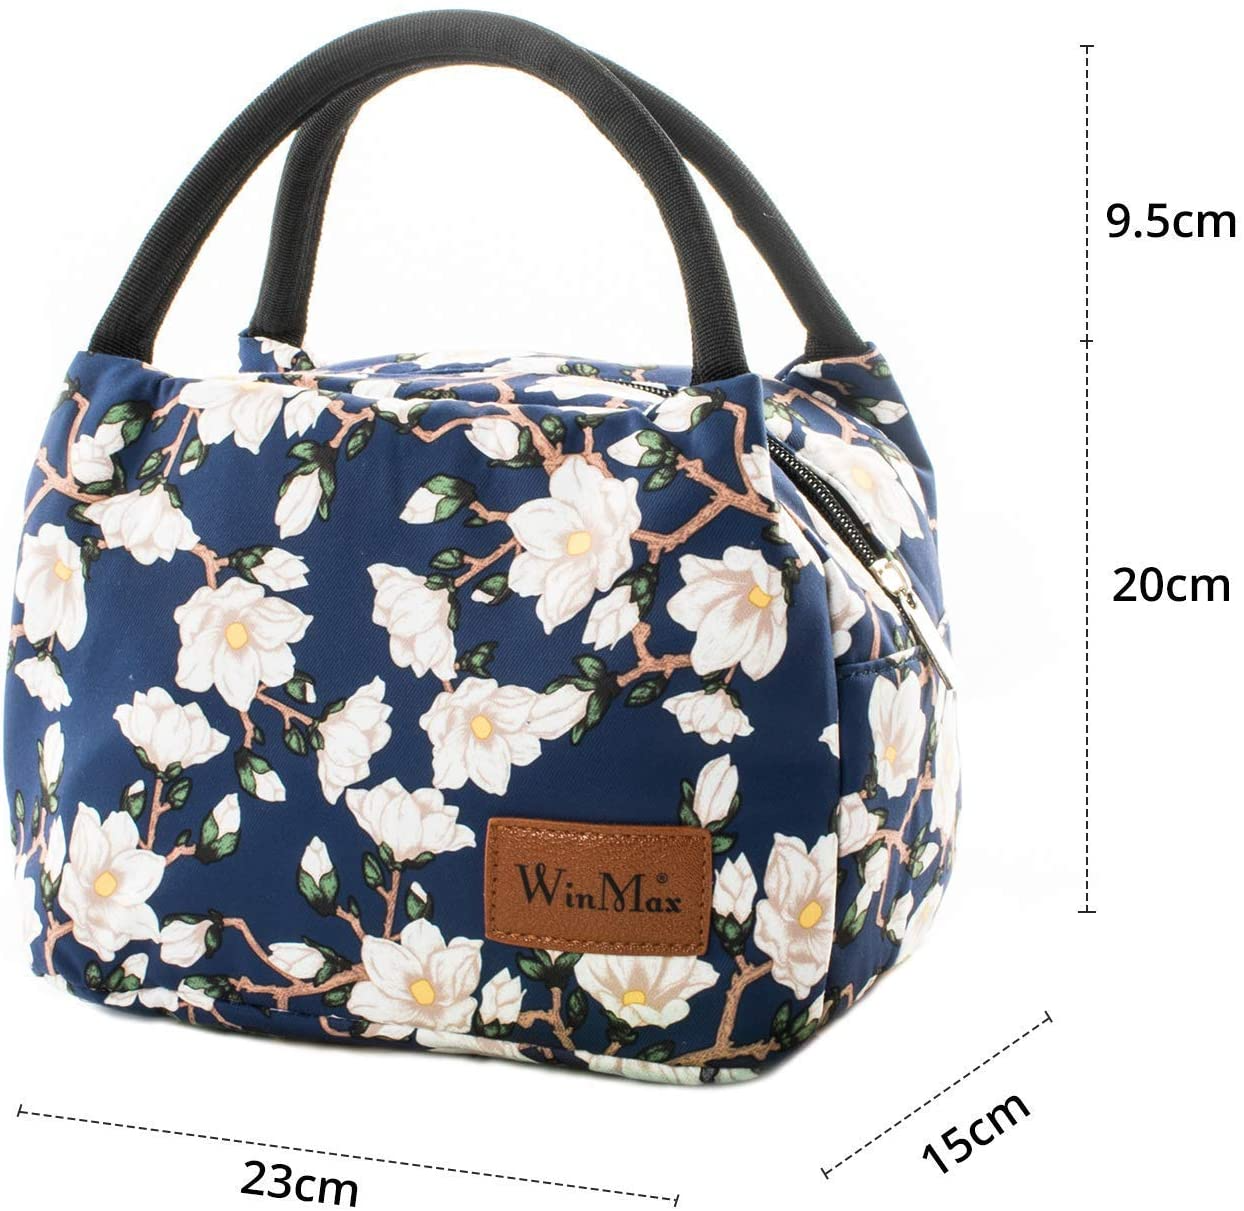 kuhltasche printed size